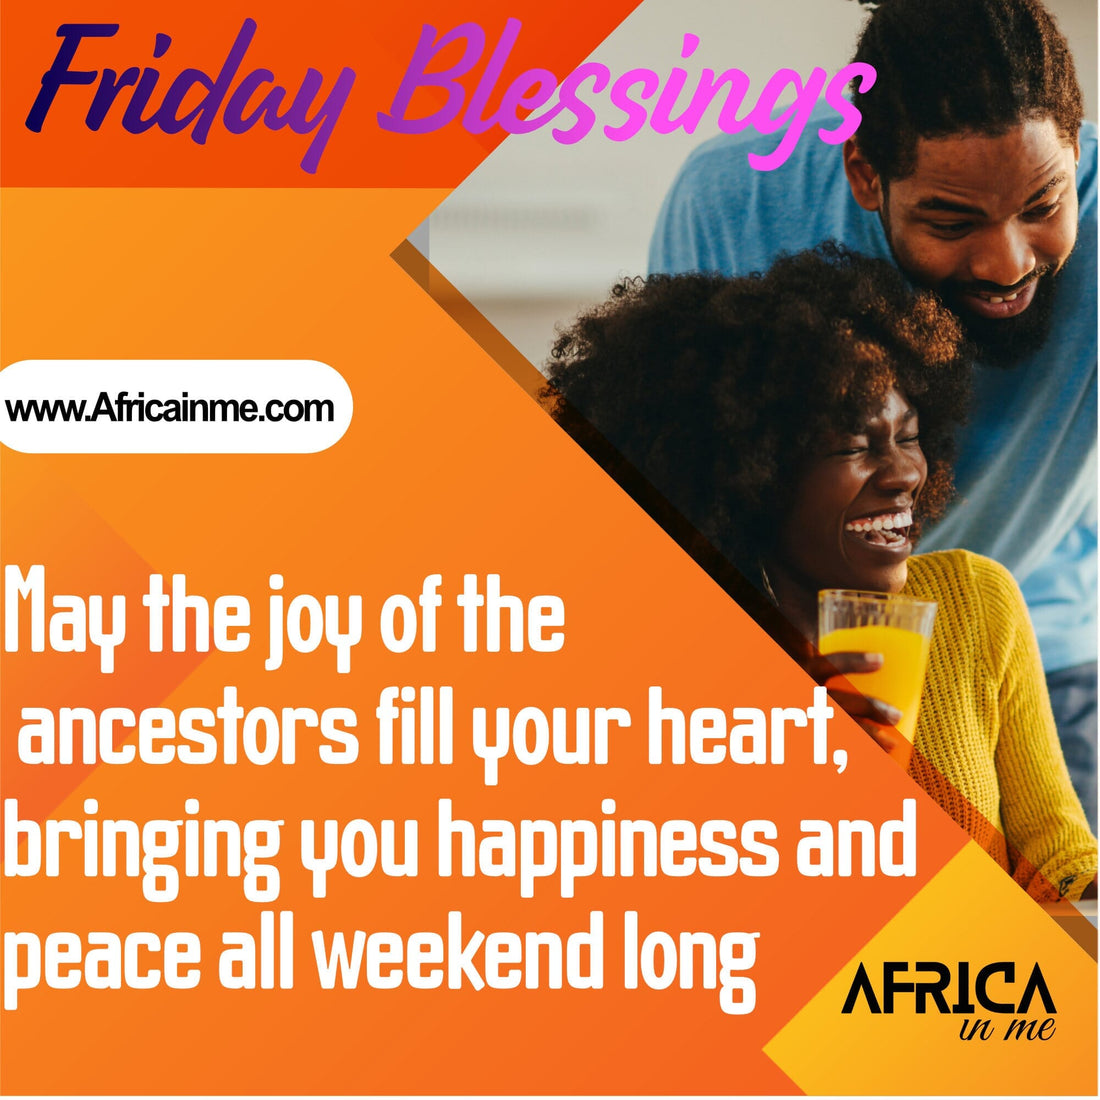 African American Friday Morning Blessings for Patience and Joy